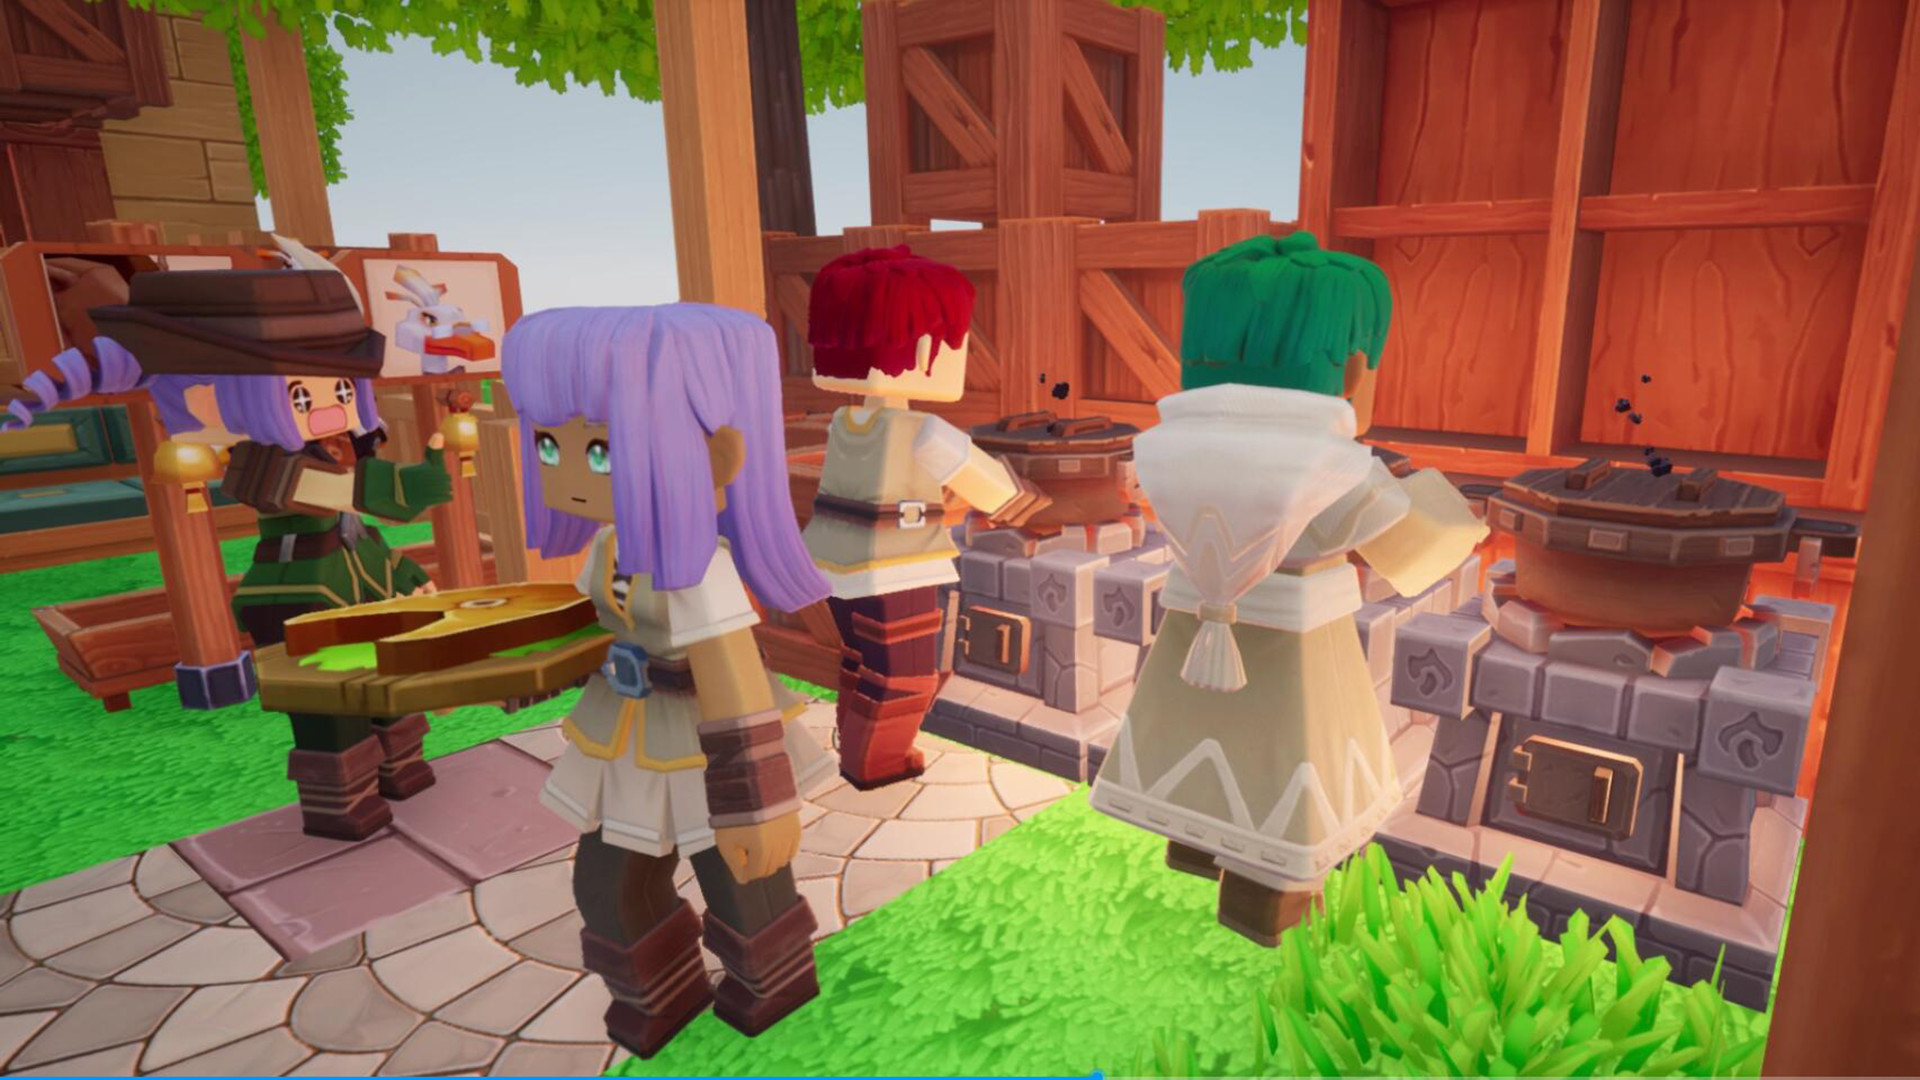 Dragon And Home: Block World  Claim TapTap exclusive gift codes